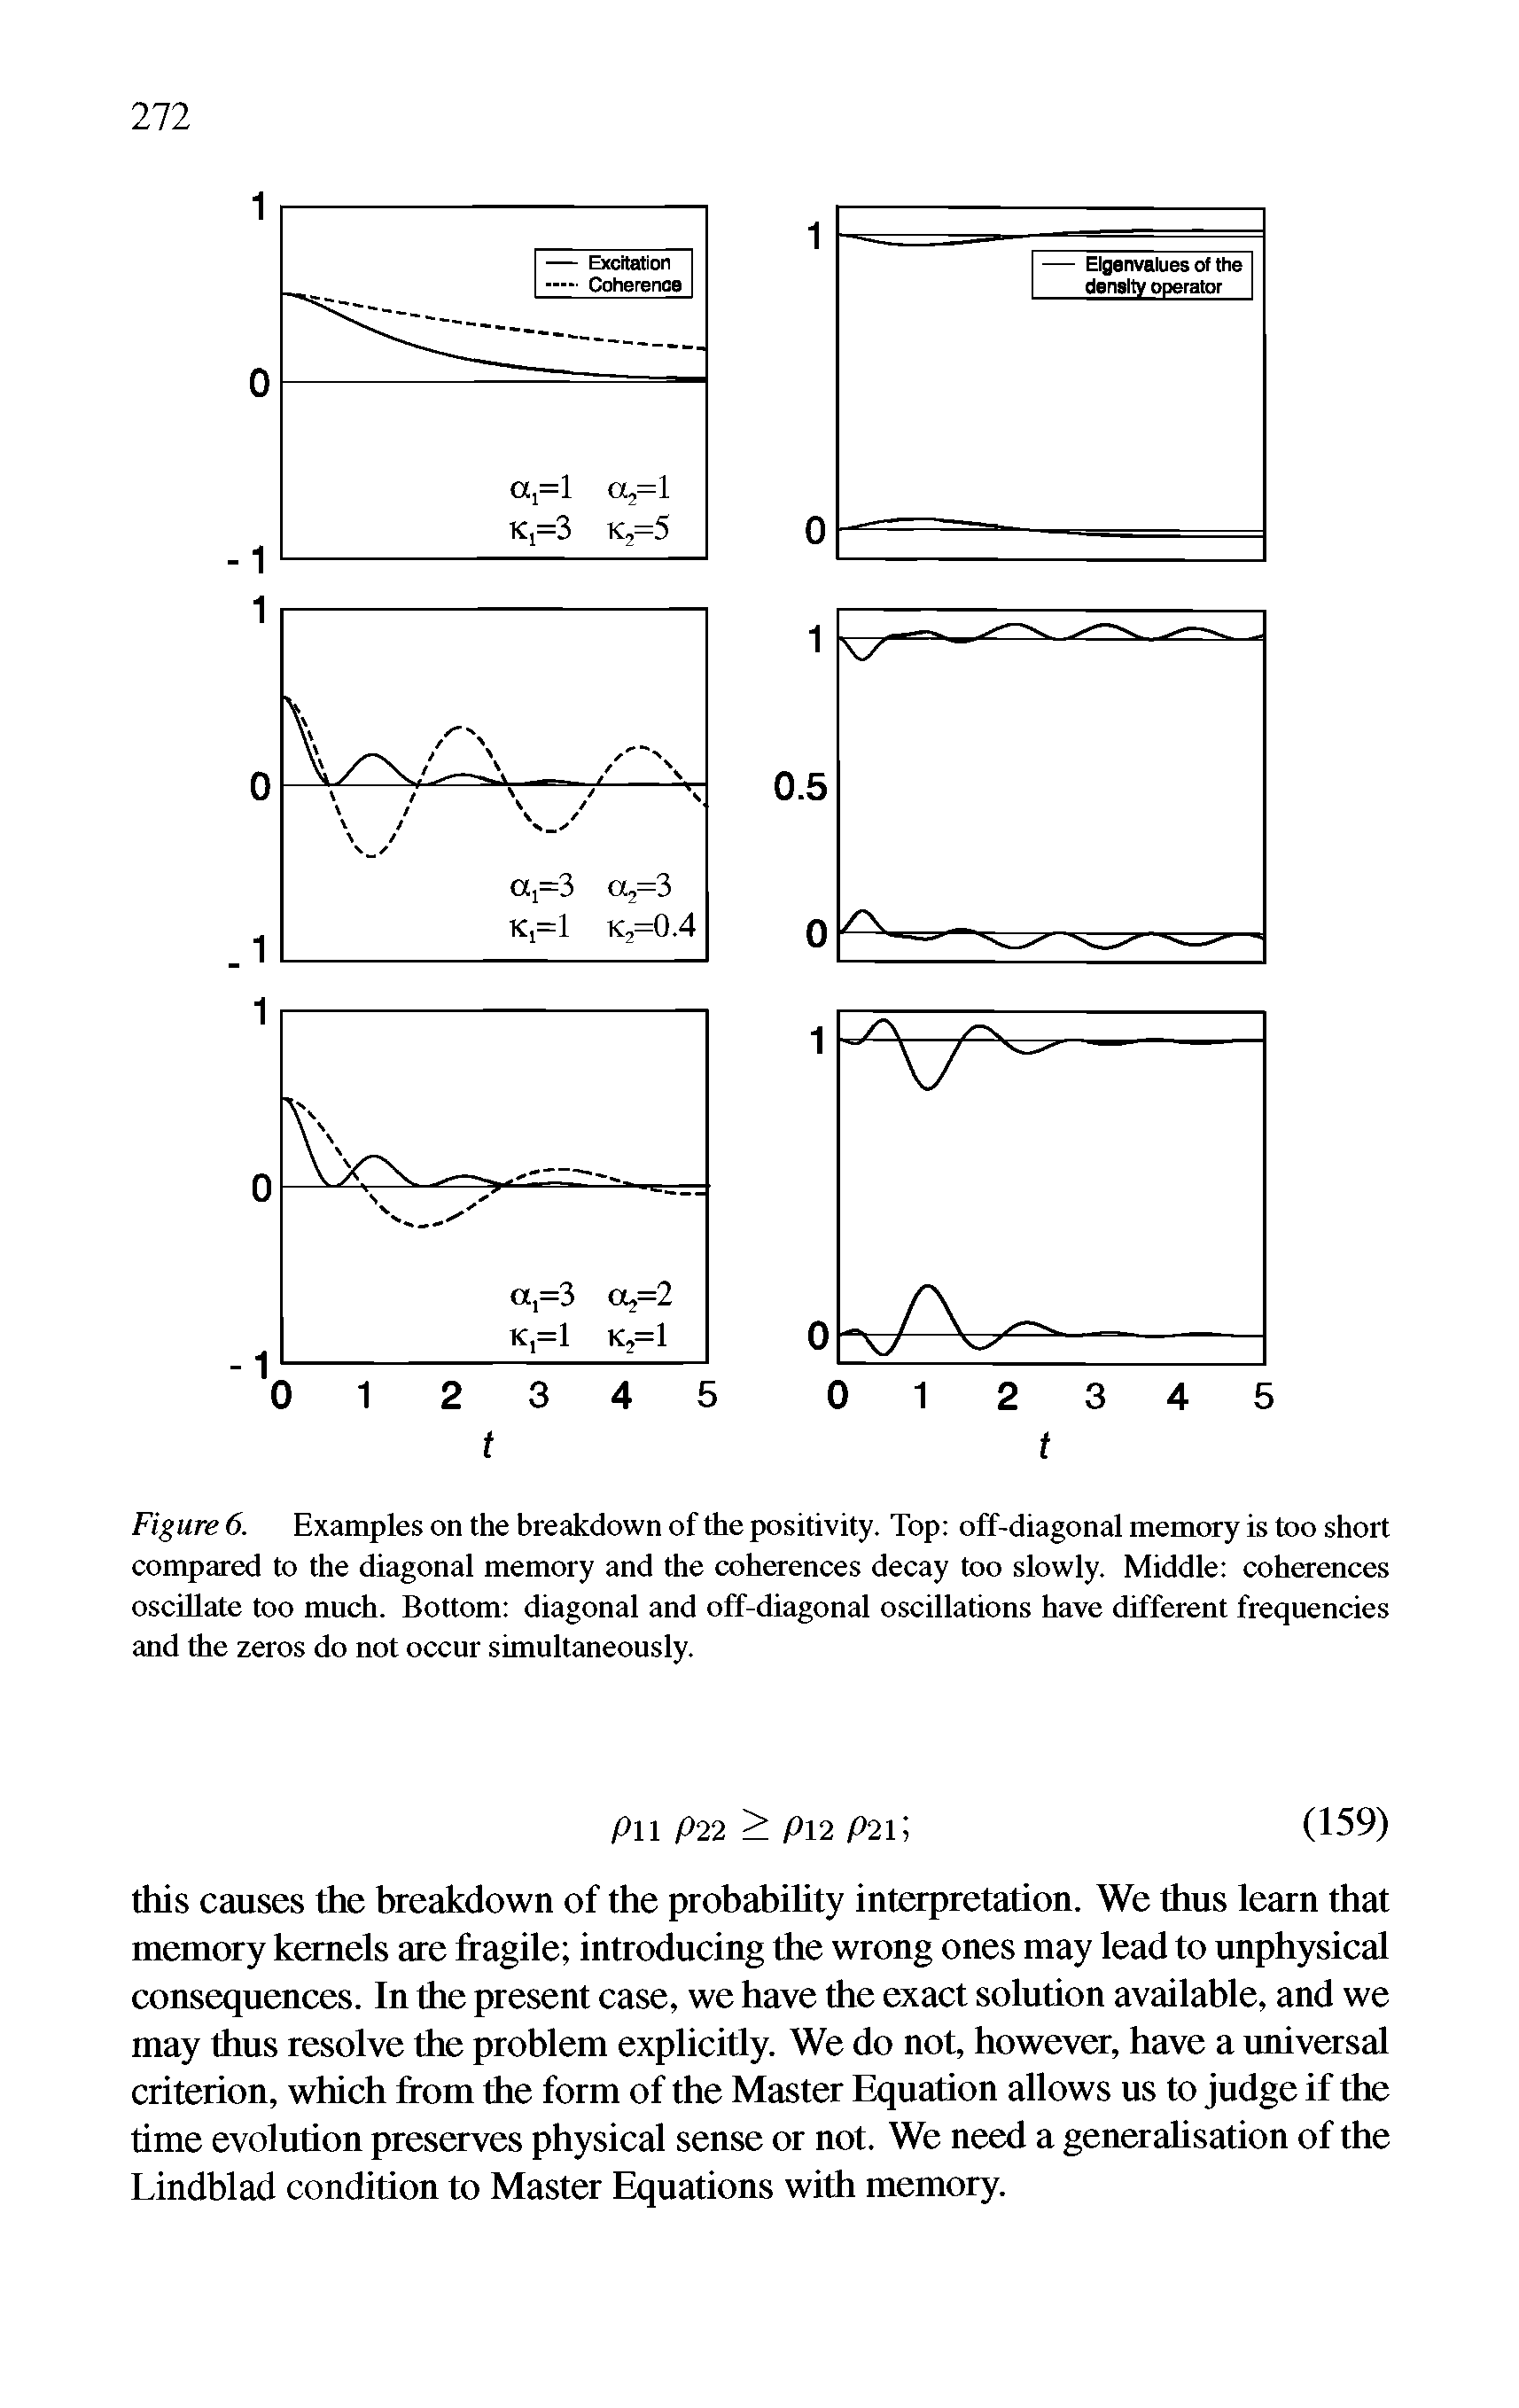 Figure 6. Examples on the breakdown of the positivity. Top off-diagonal memory is too short compared to the diagonal memory and the coherences decay too slowly. Middle coherences oscillate too much. Bottom diagonal and off-diagonal oscillations have different frequencies and the zeros do not occur simultaneously.